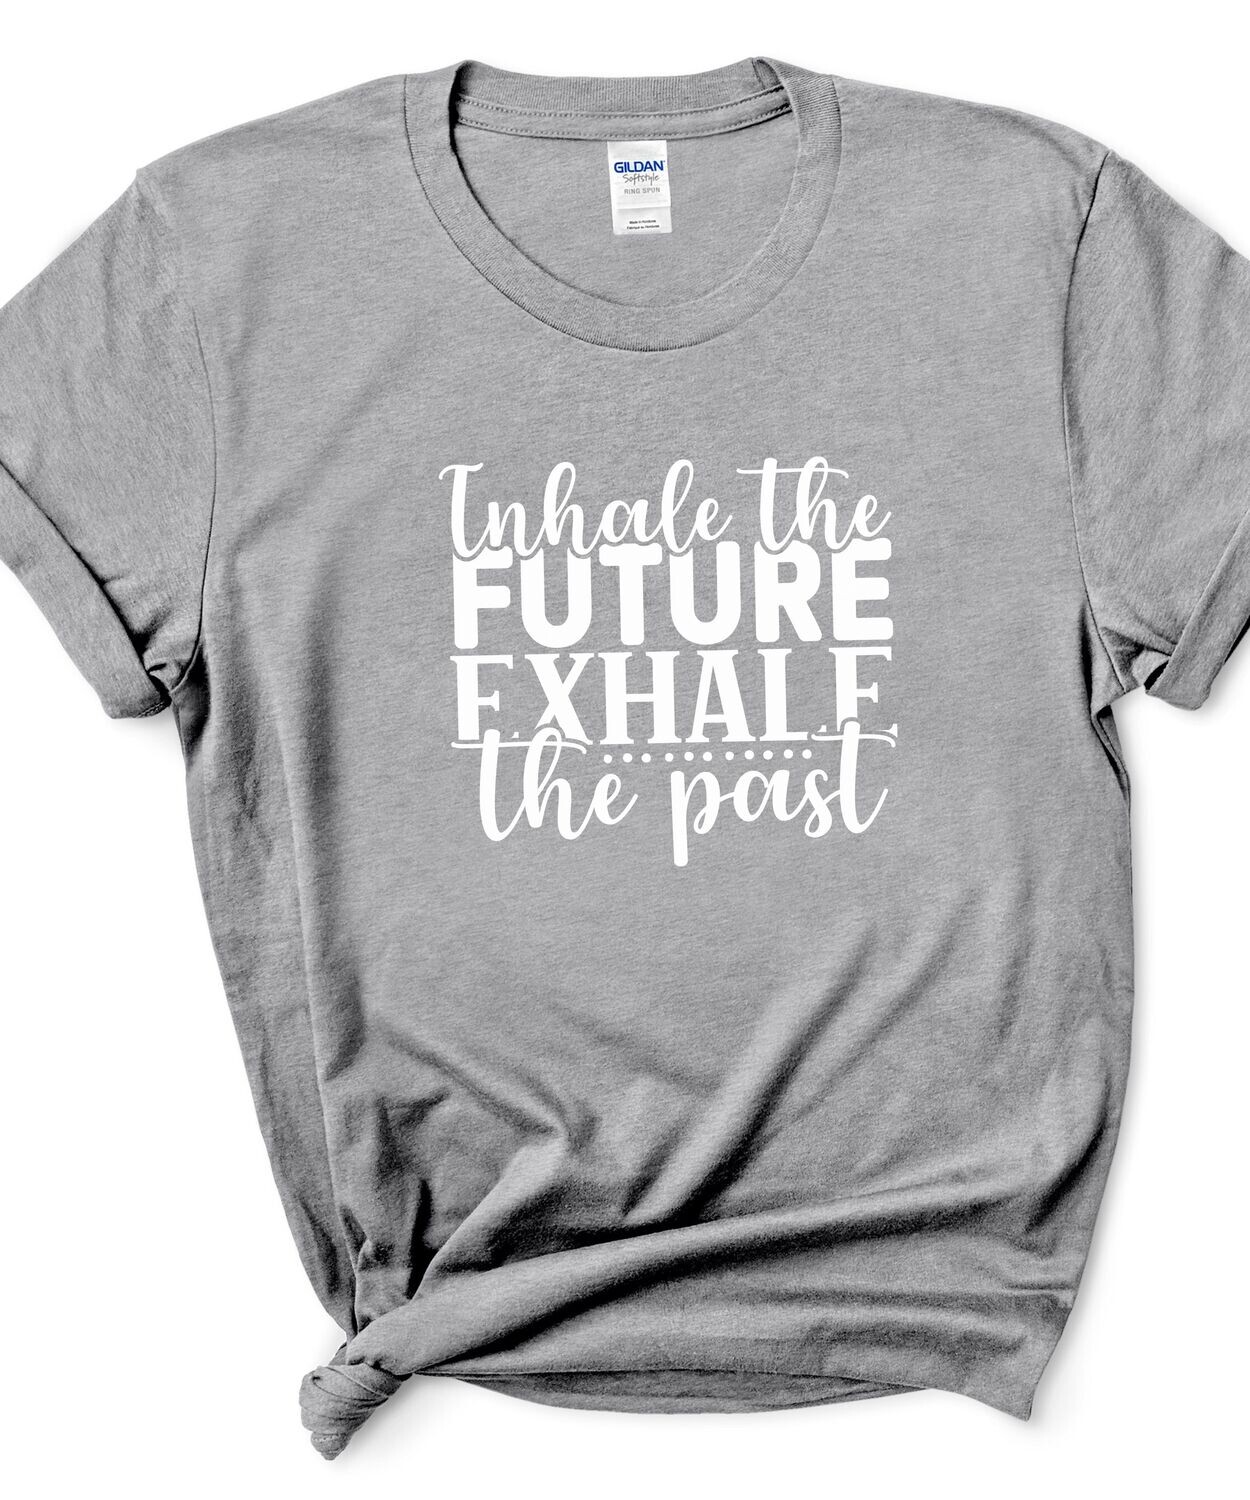 Inhale the future exhale the past t-shirt